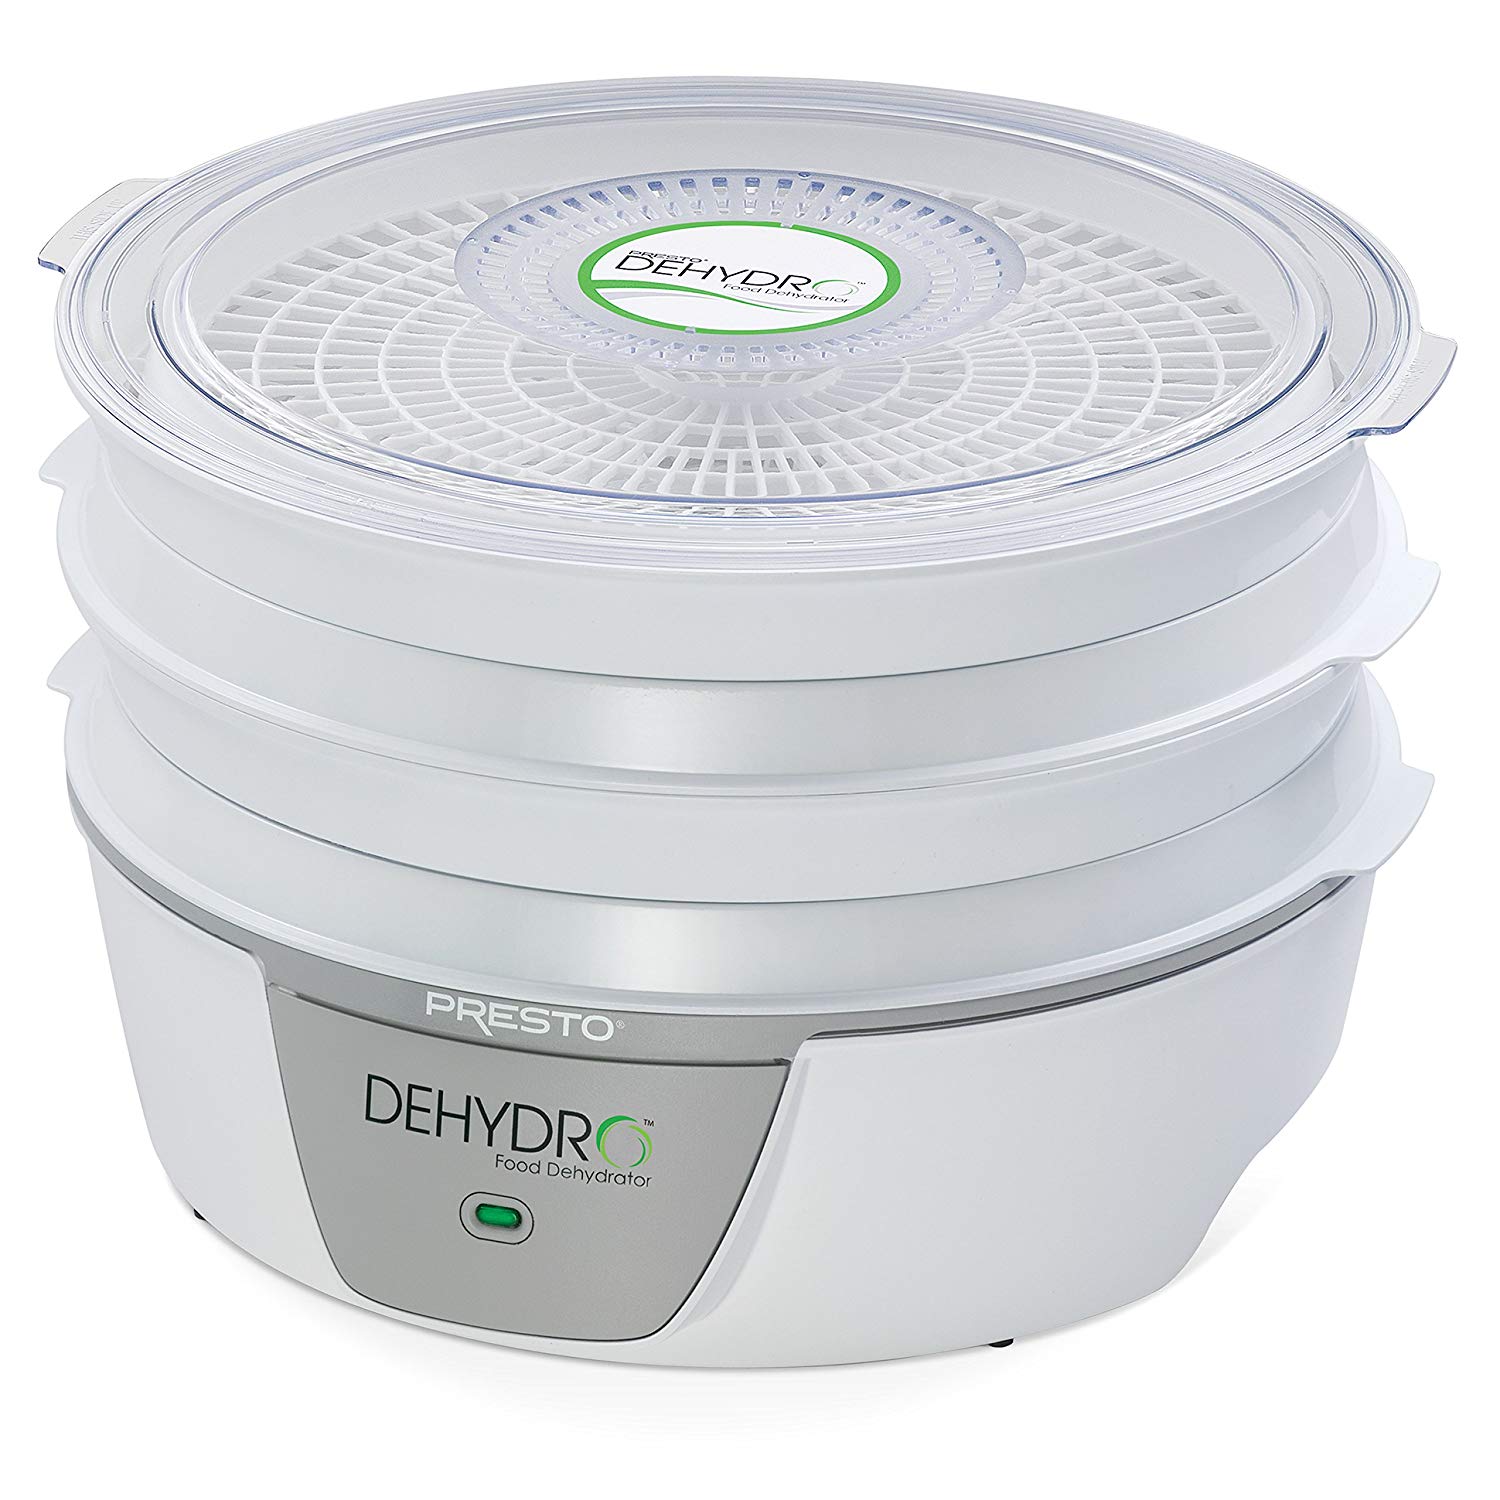 Read more about the article Presto Dehydro Electric Food Dehydrator 06300